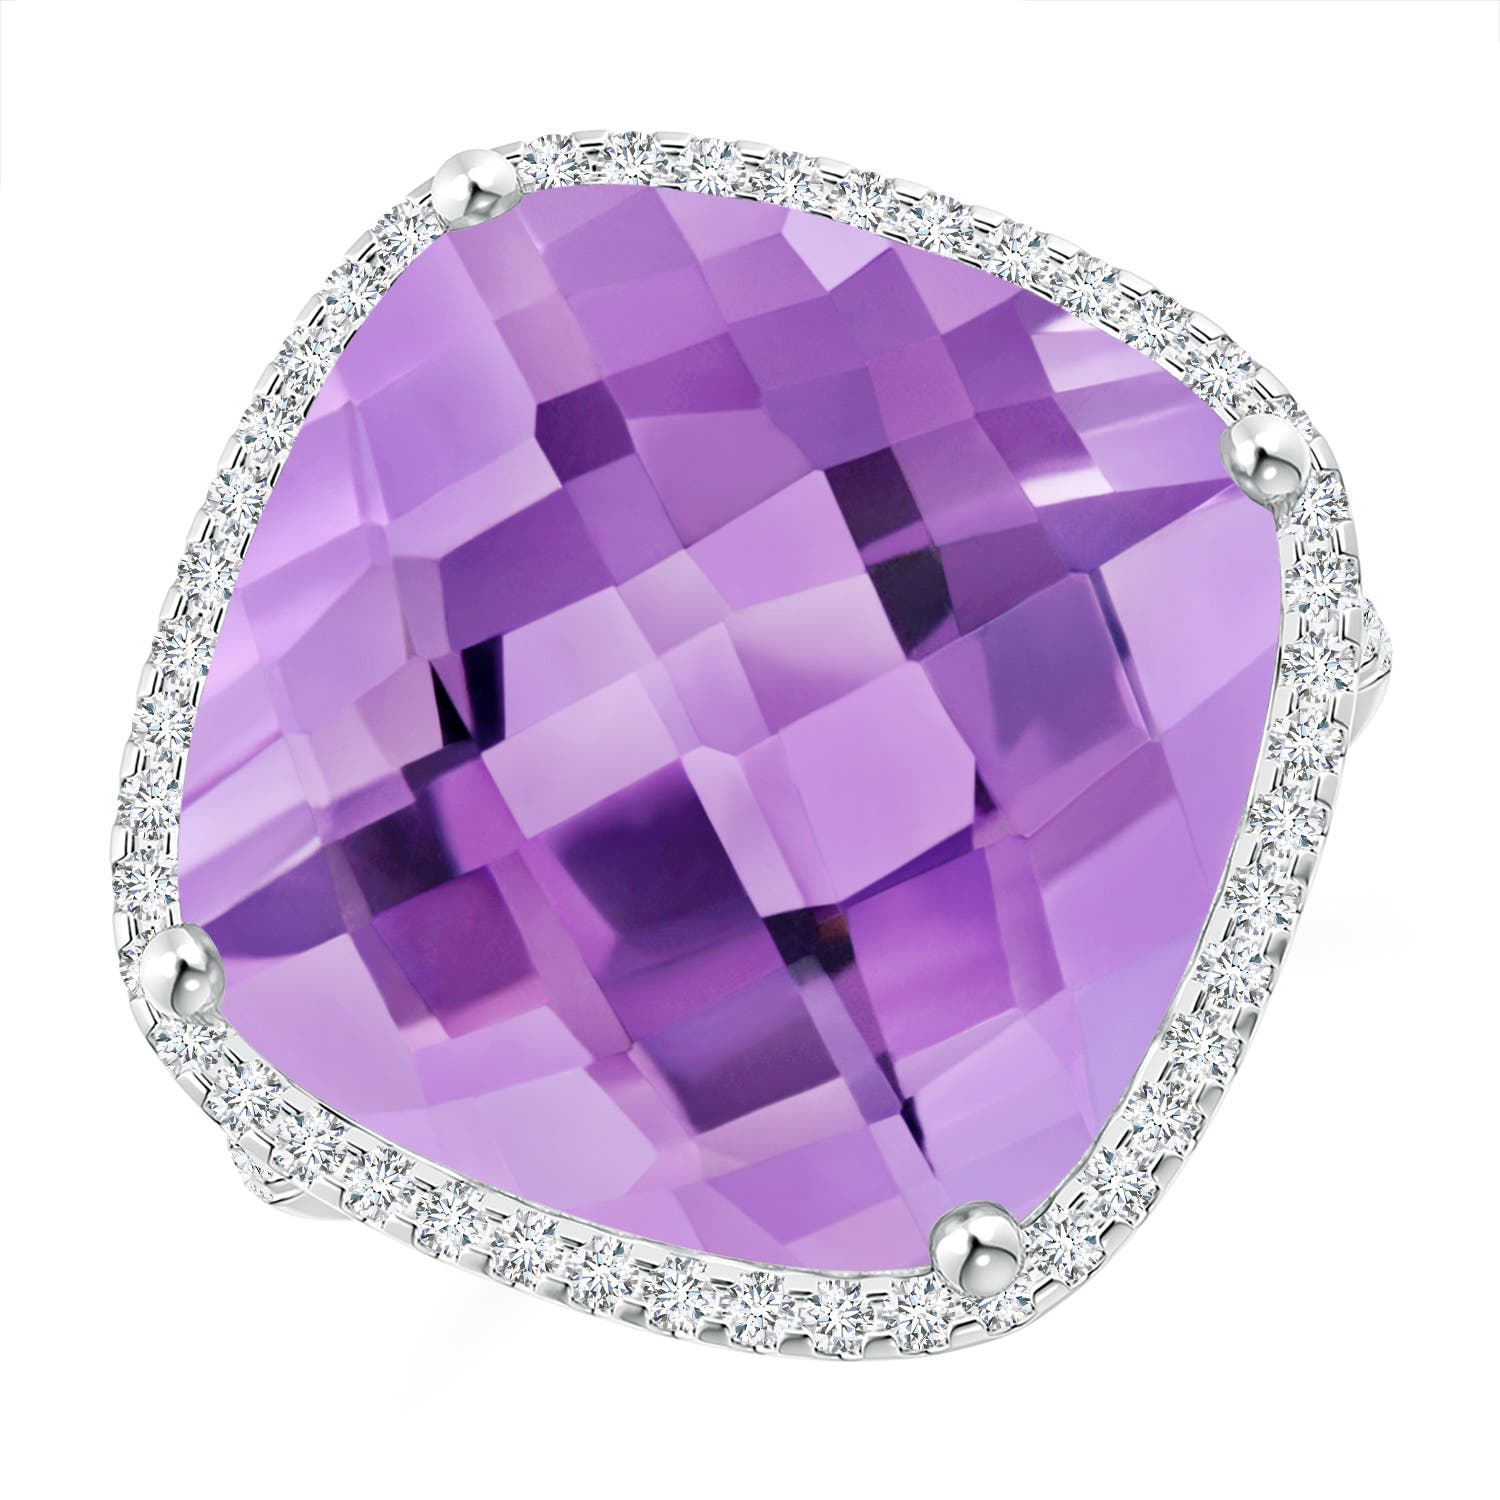 A - Amethyst / 13.89 CT / 14 KT White Gold